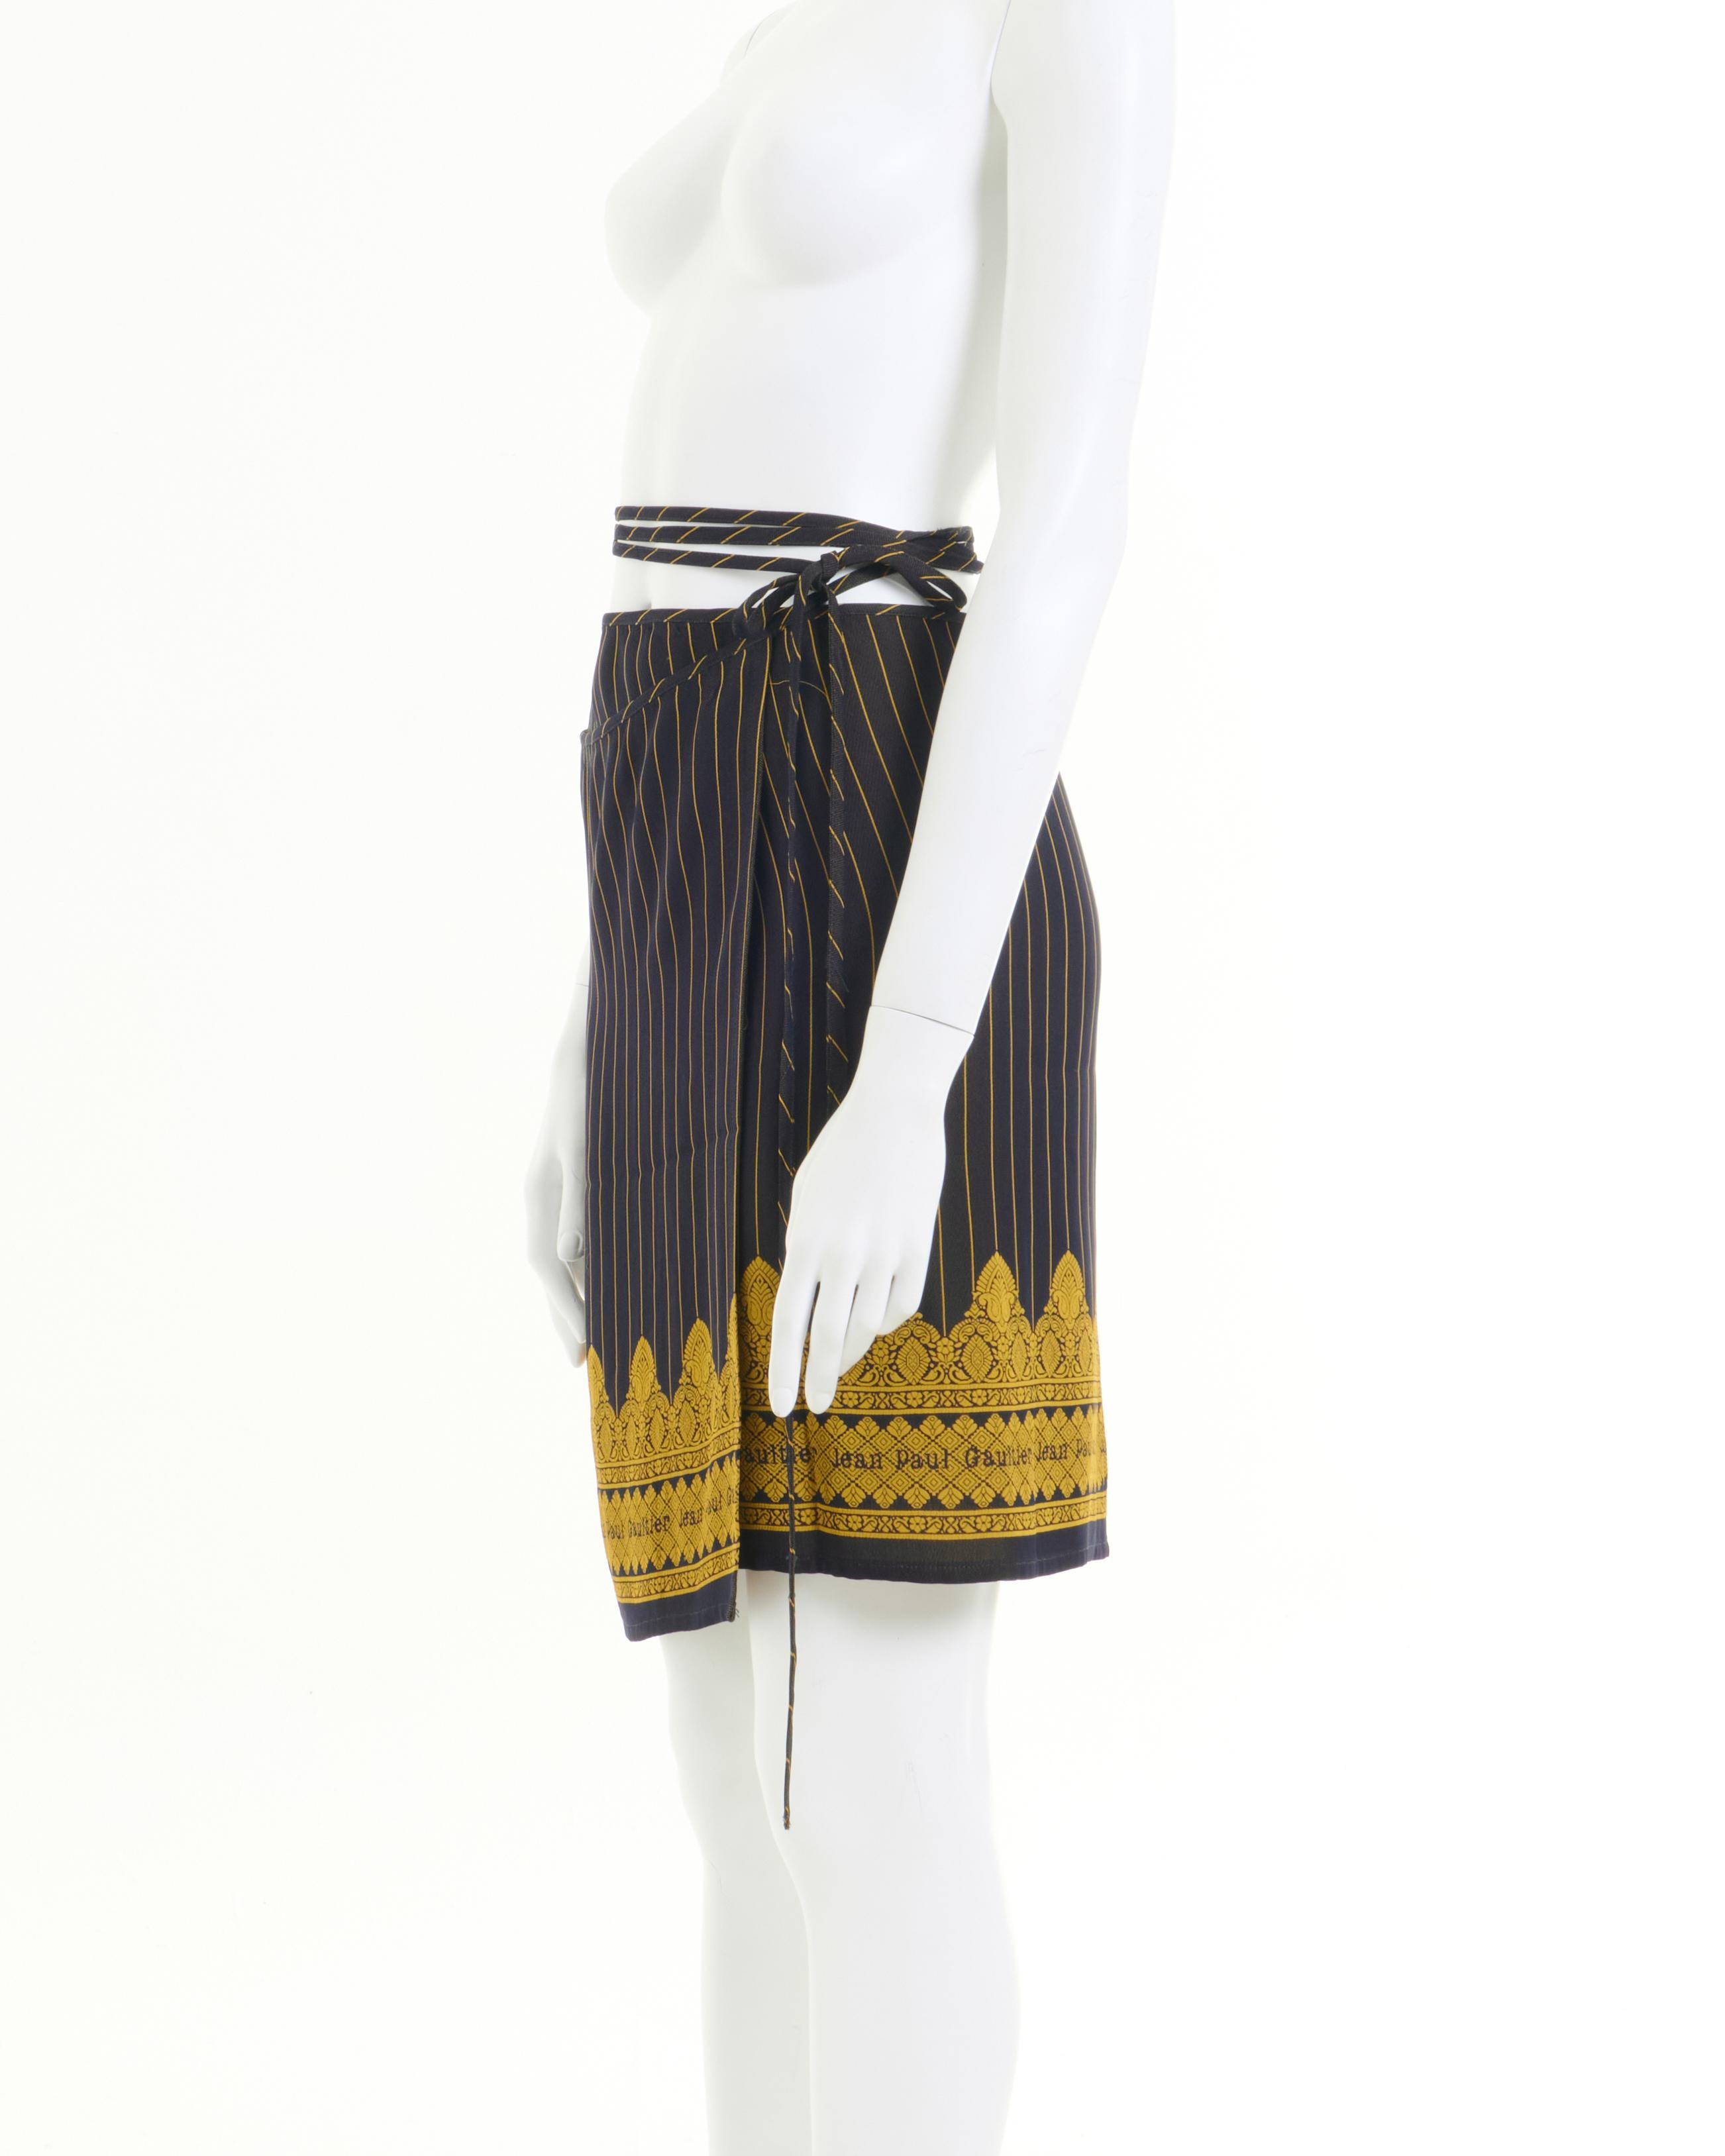 Jean Paul Gaultier S/S 1997 Pinstripe Jacquard black wrap skirt In Excellent Condition For Sale In Milano, IT